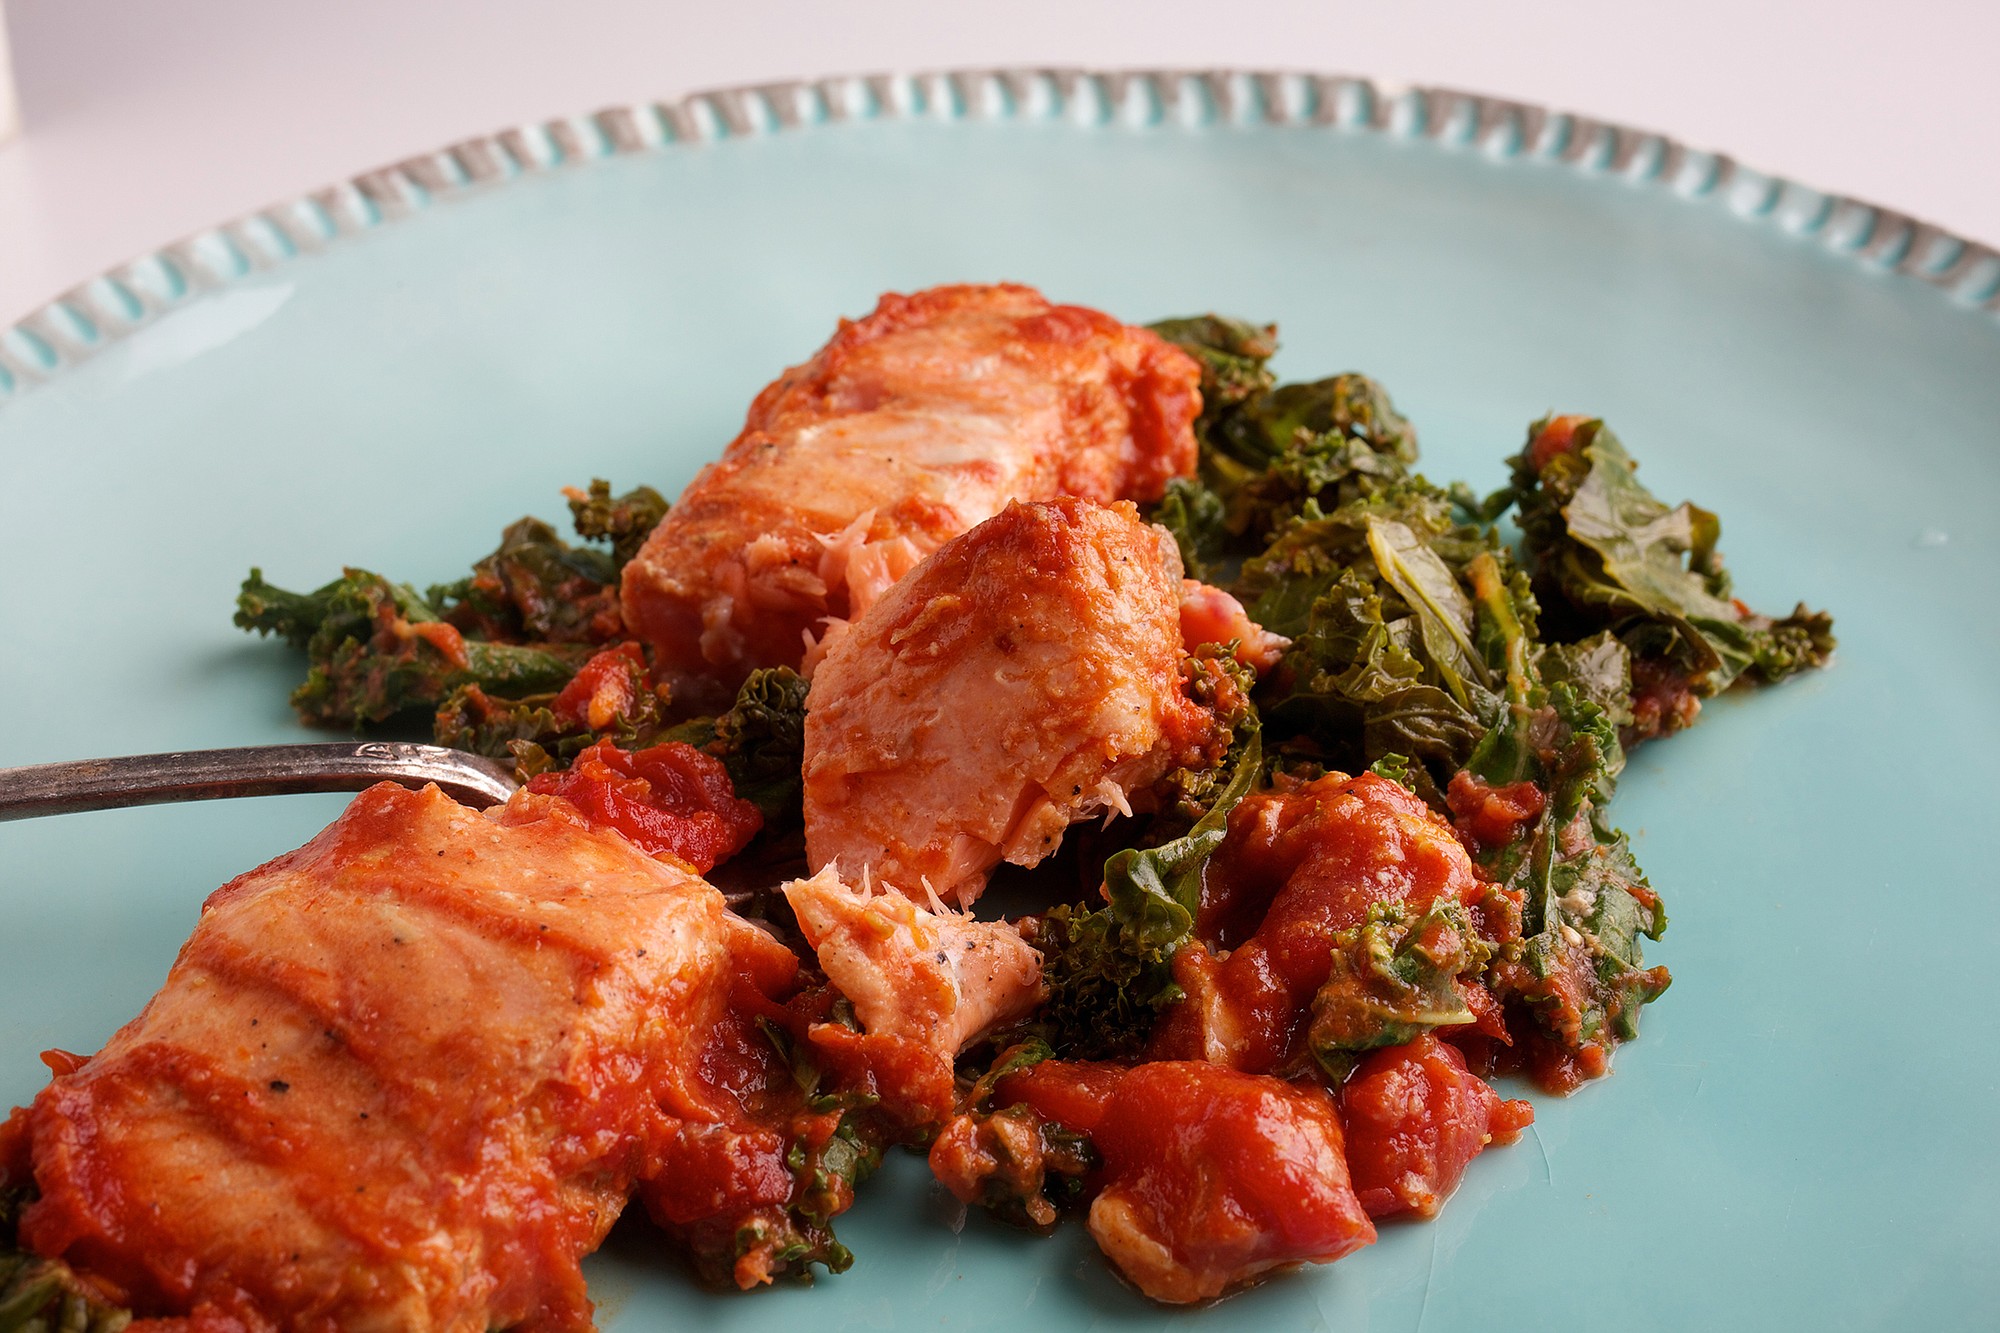 Baked Salmon and Kale in Moroccan-Spiced Tomato Sauce.